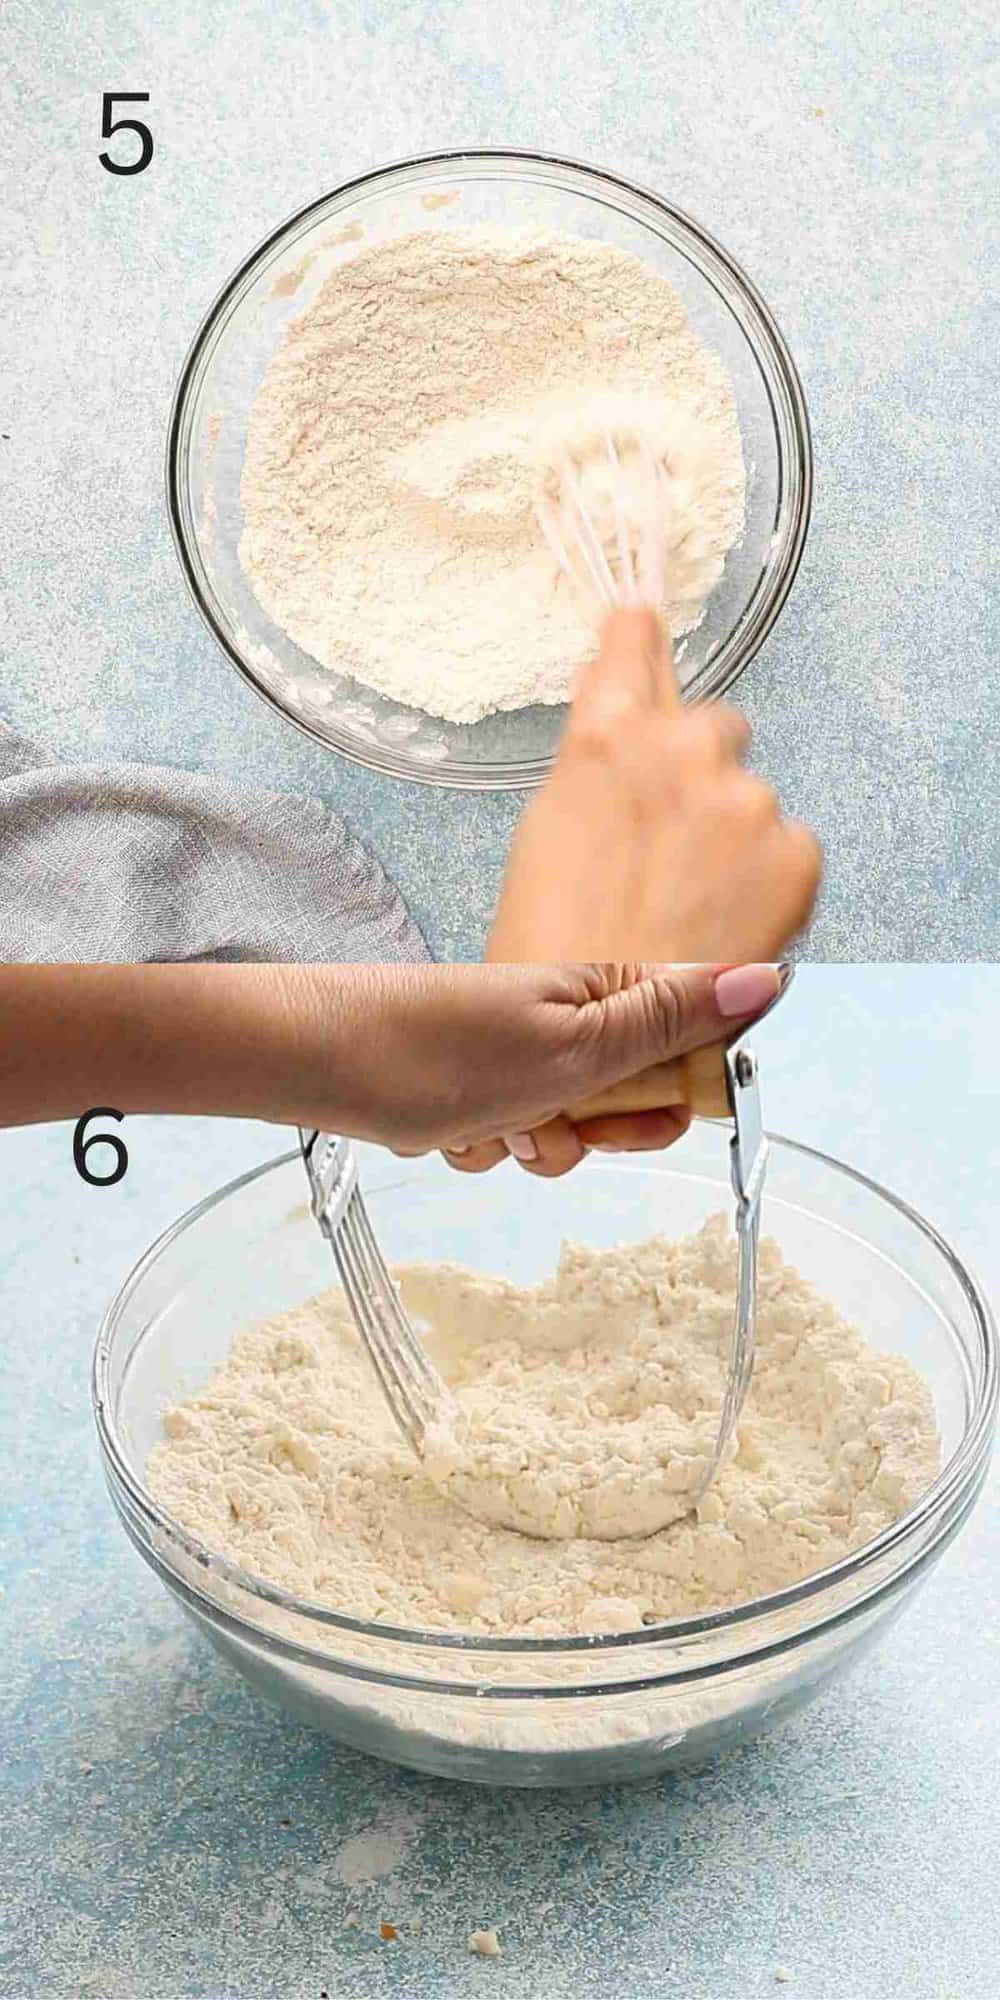 two photo collage of a hand mixing and cutting butter into flour mixture in a glass bowl using a pastry cutter.